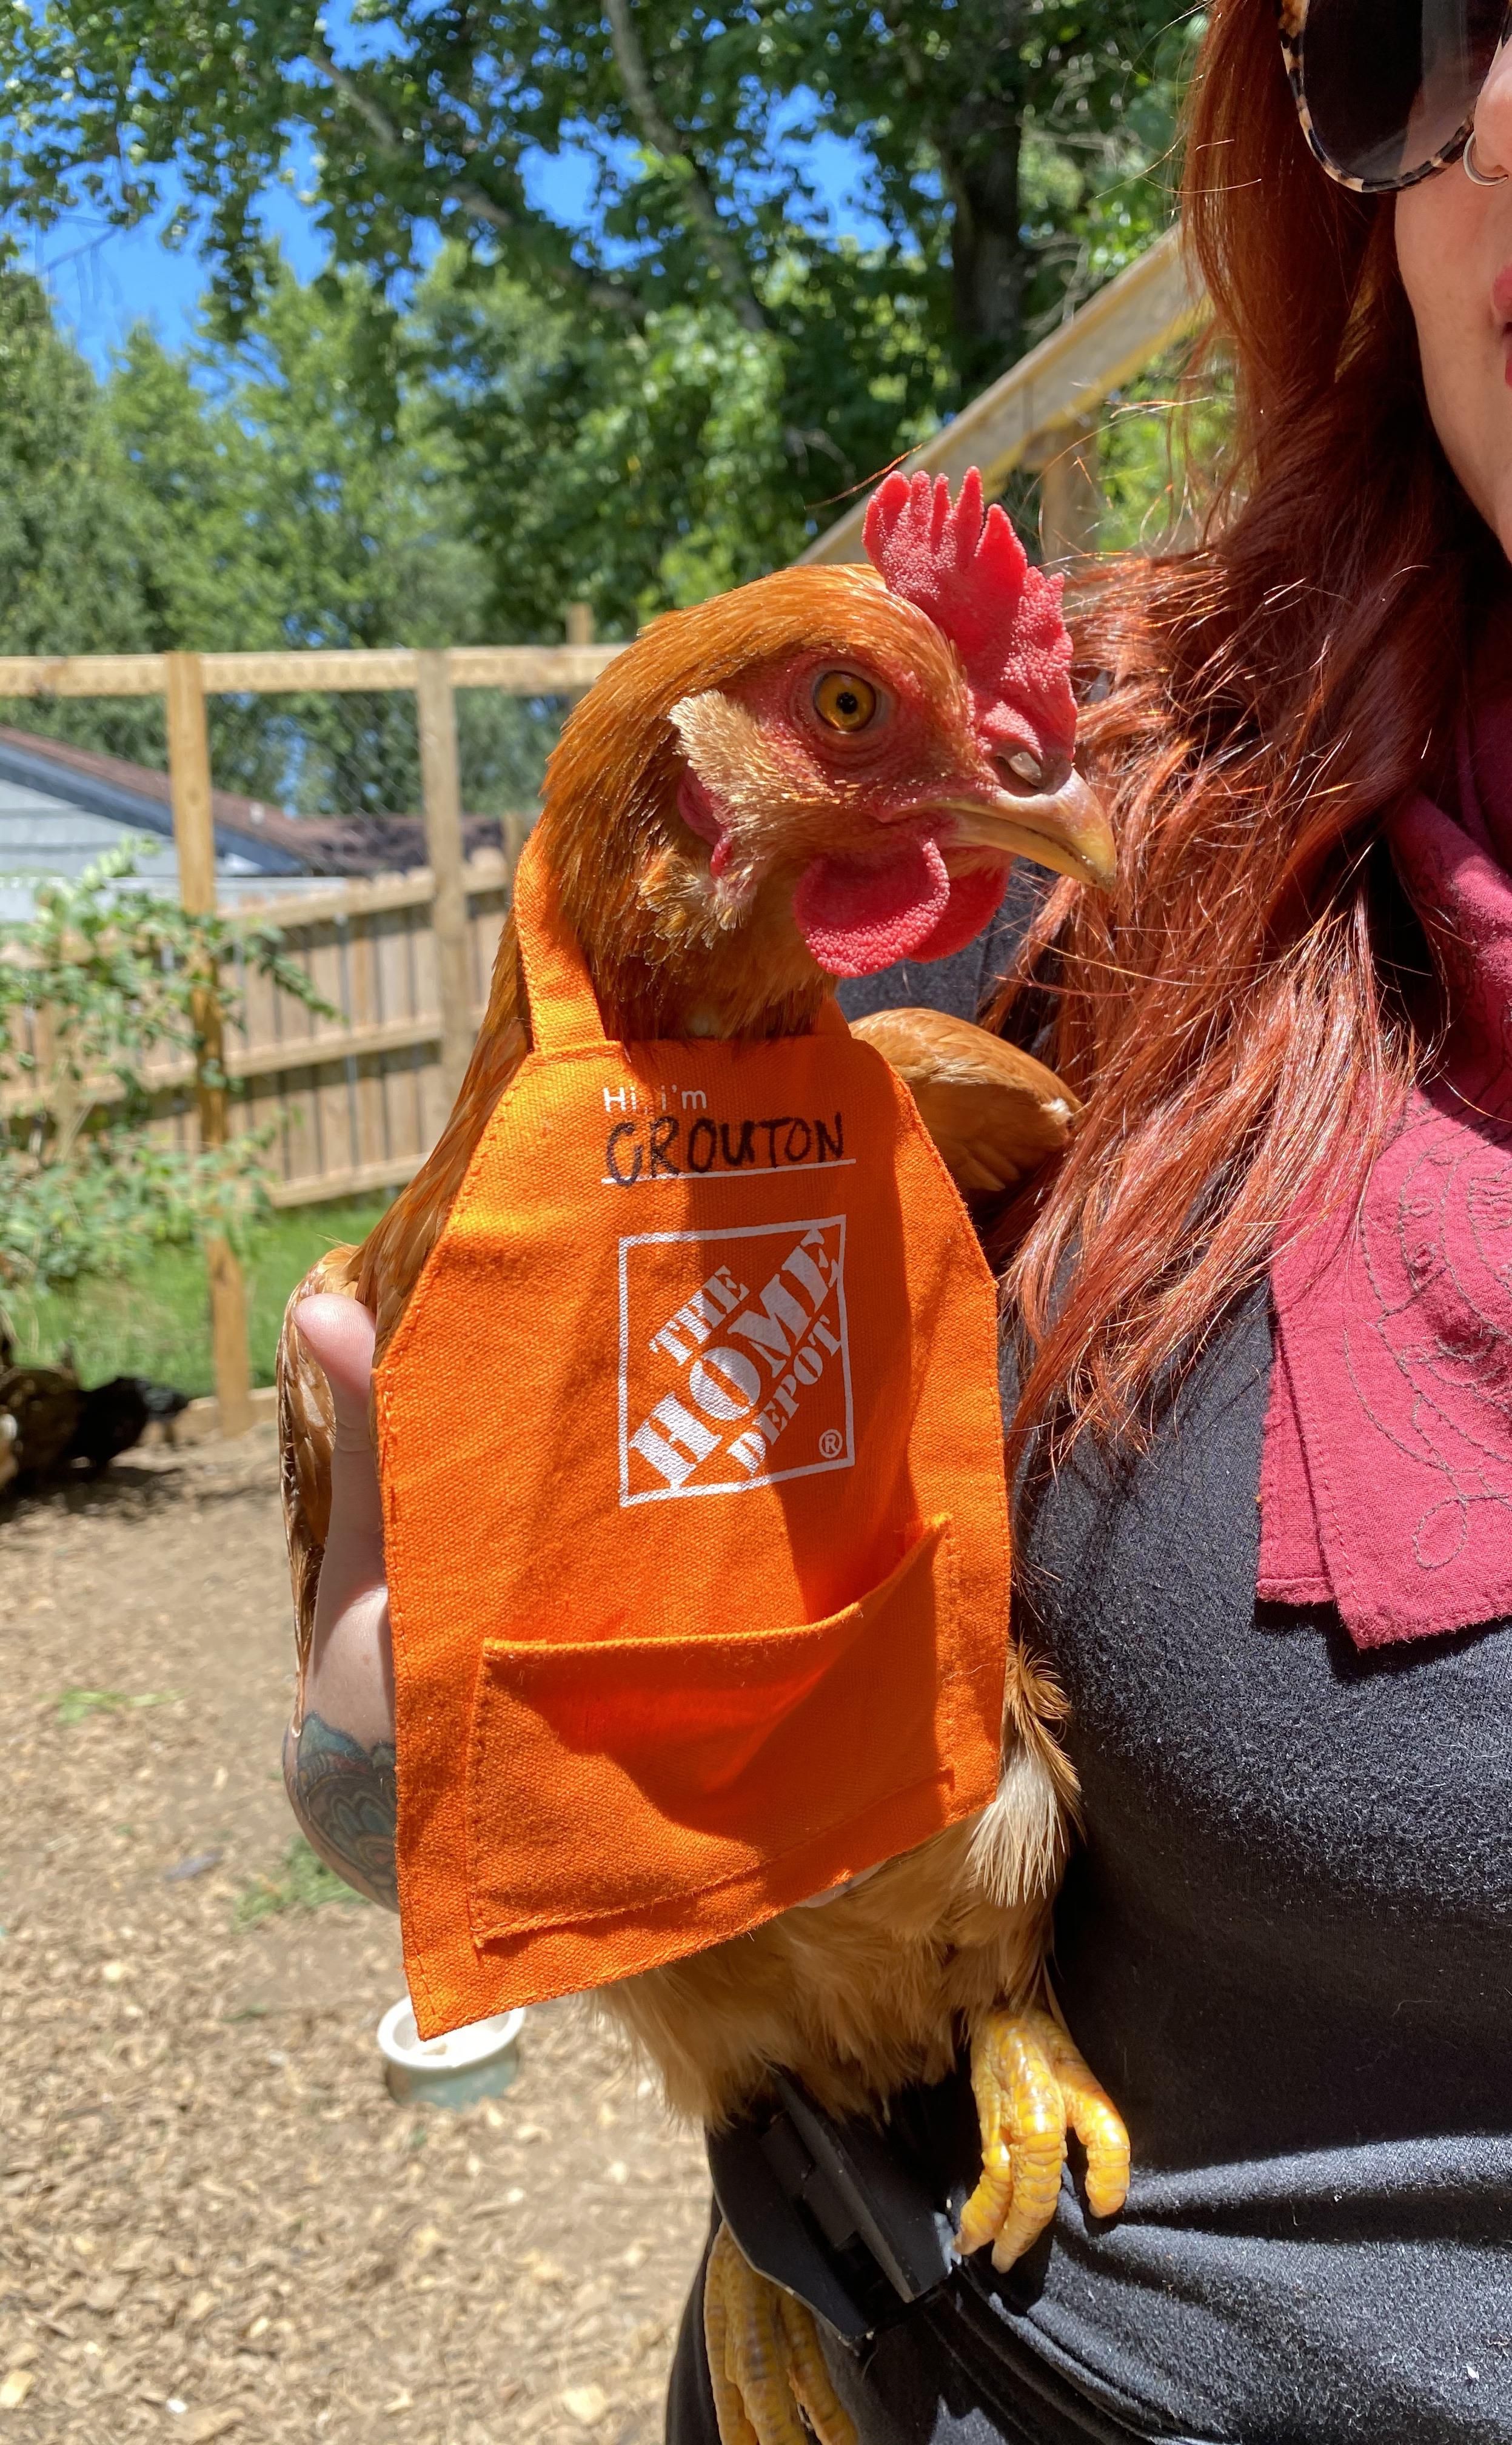 Life pro tip: Home Depot gift card aprons fit chickens